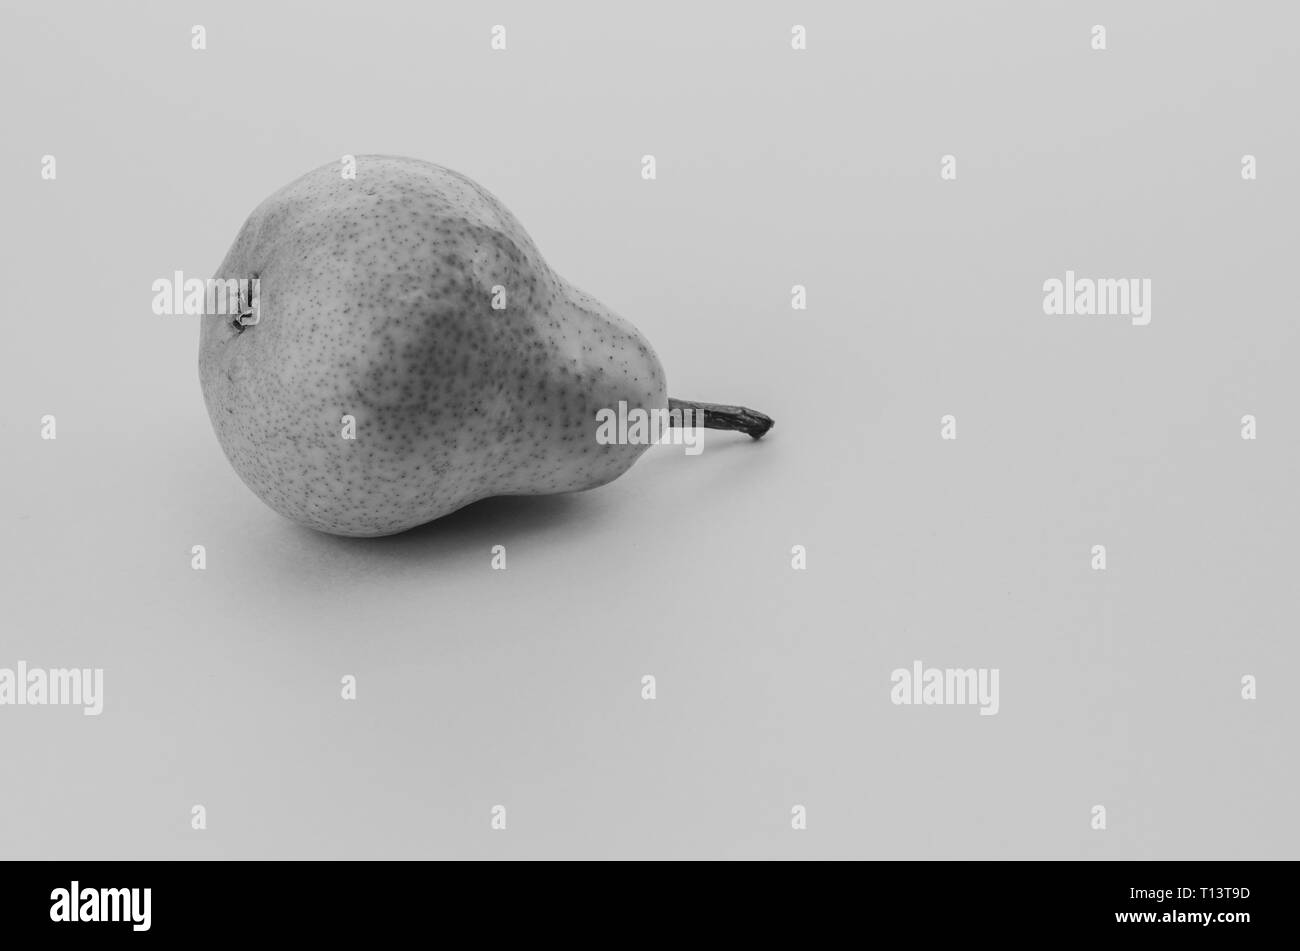 ripe pear fruit on a blank surface surface - black and white image Stock Photo